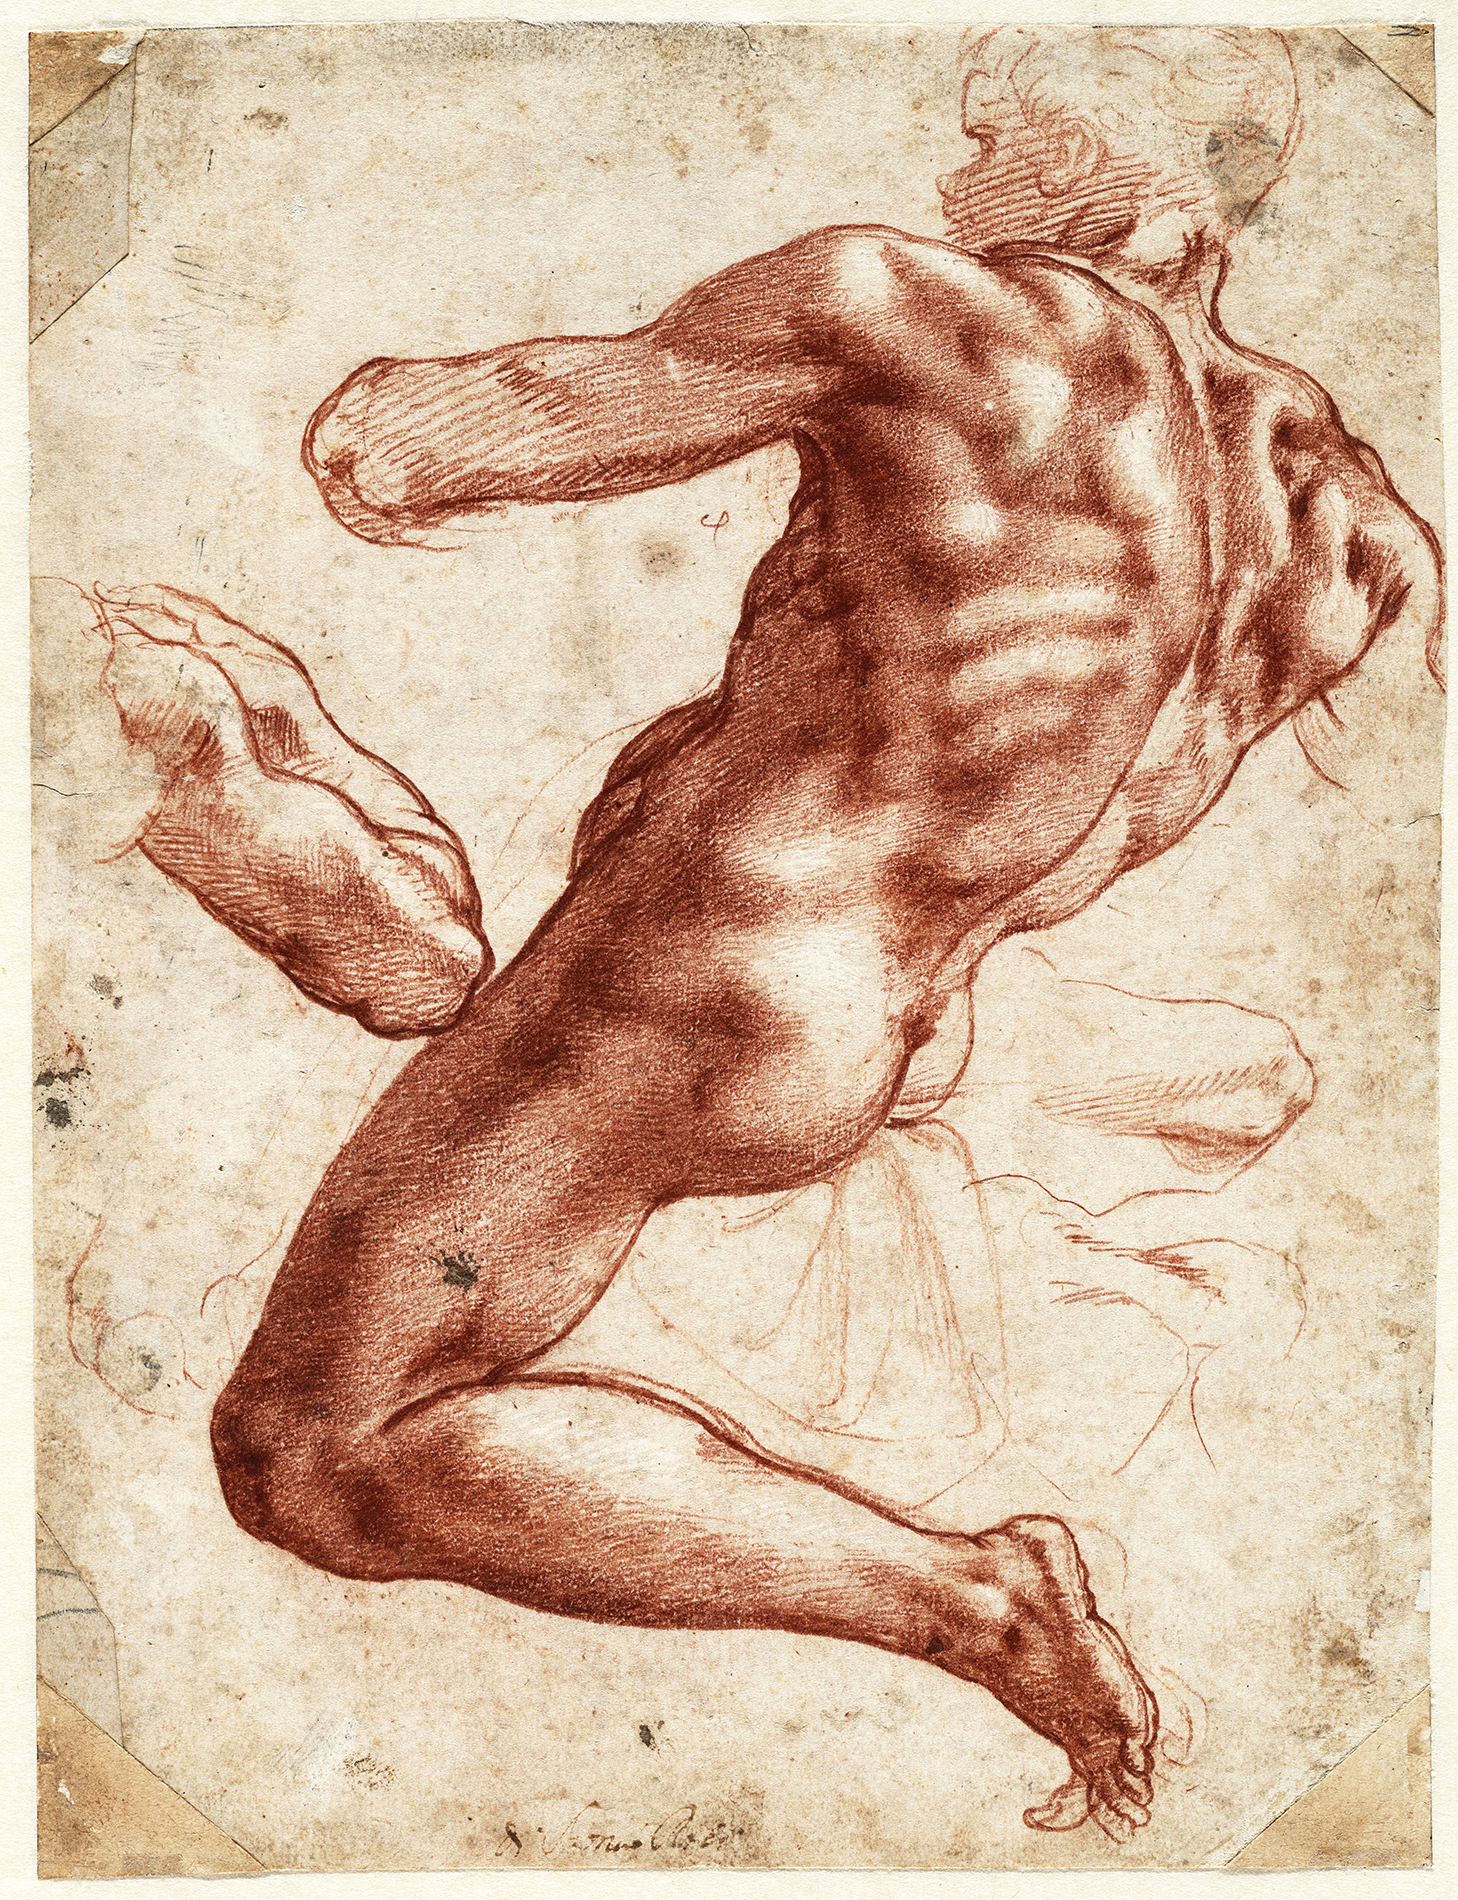 Michelangelo Drawings fantastic images by the great artist